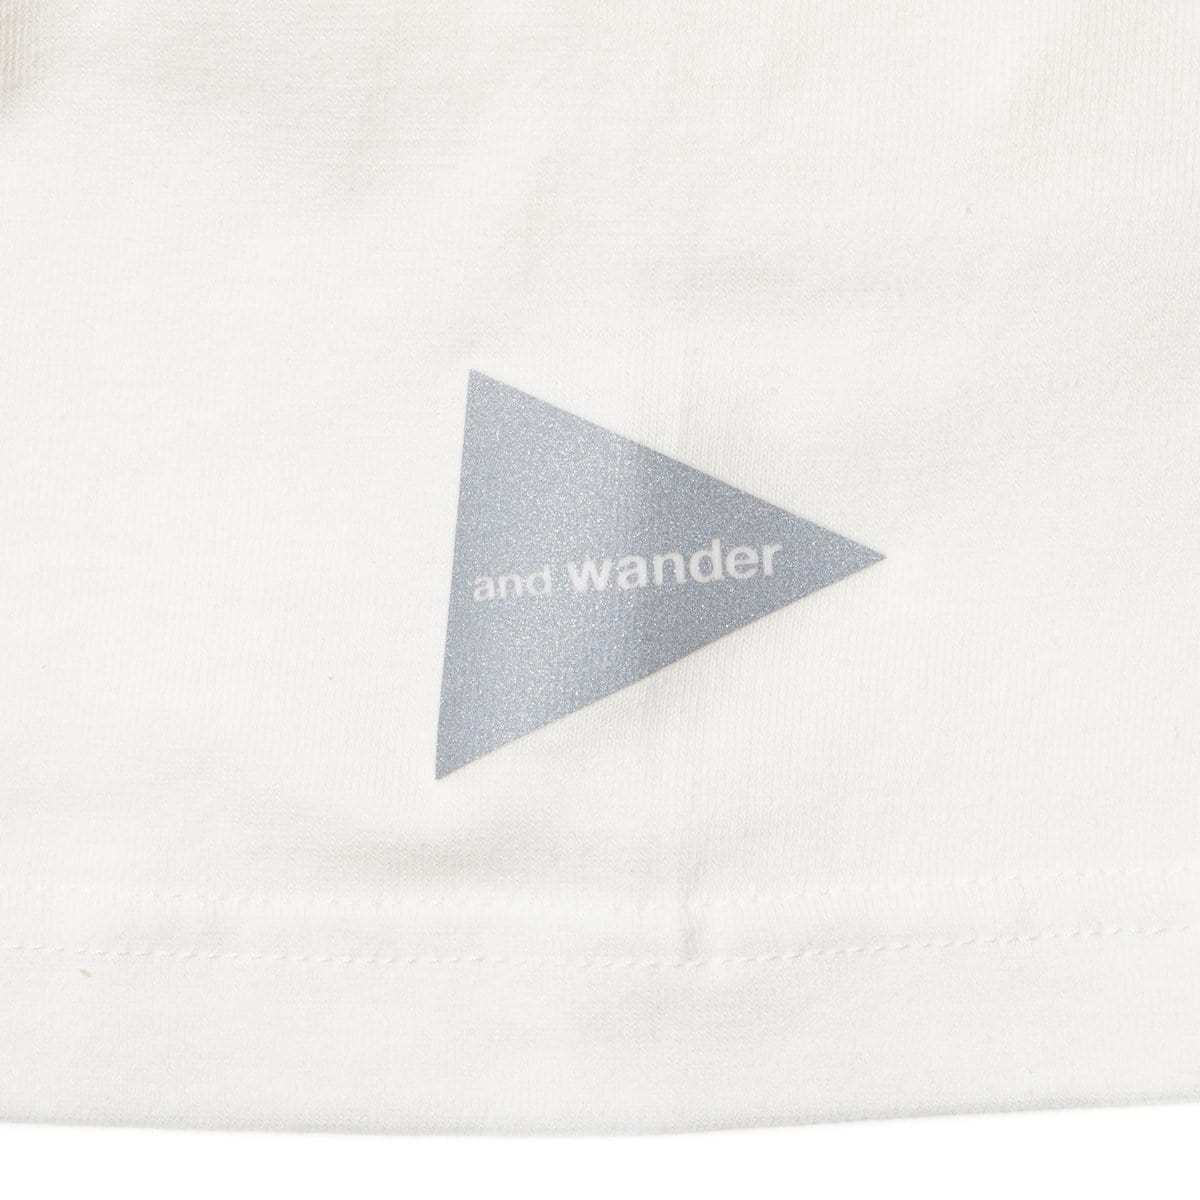 and wander T-Shirts MESSAGE T BY FUMIKAZU OHARA